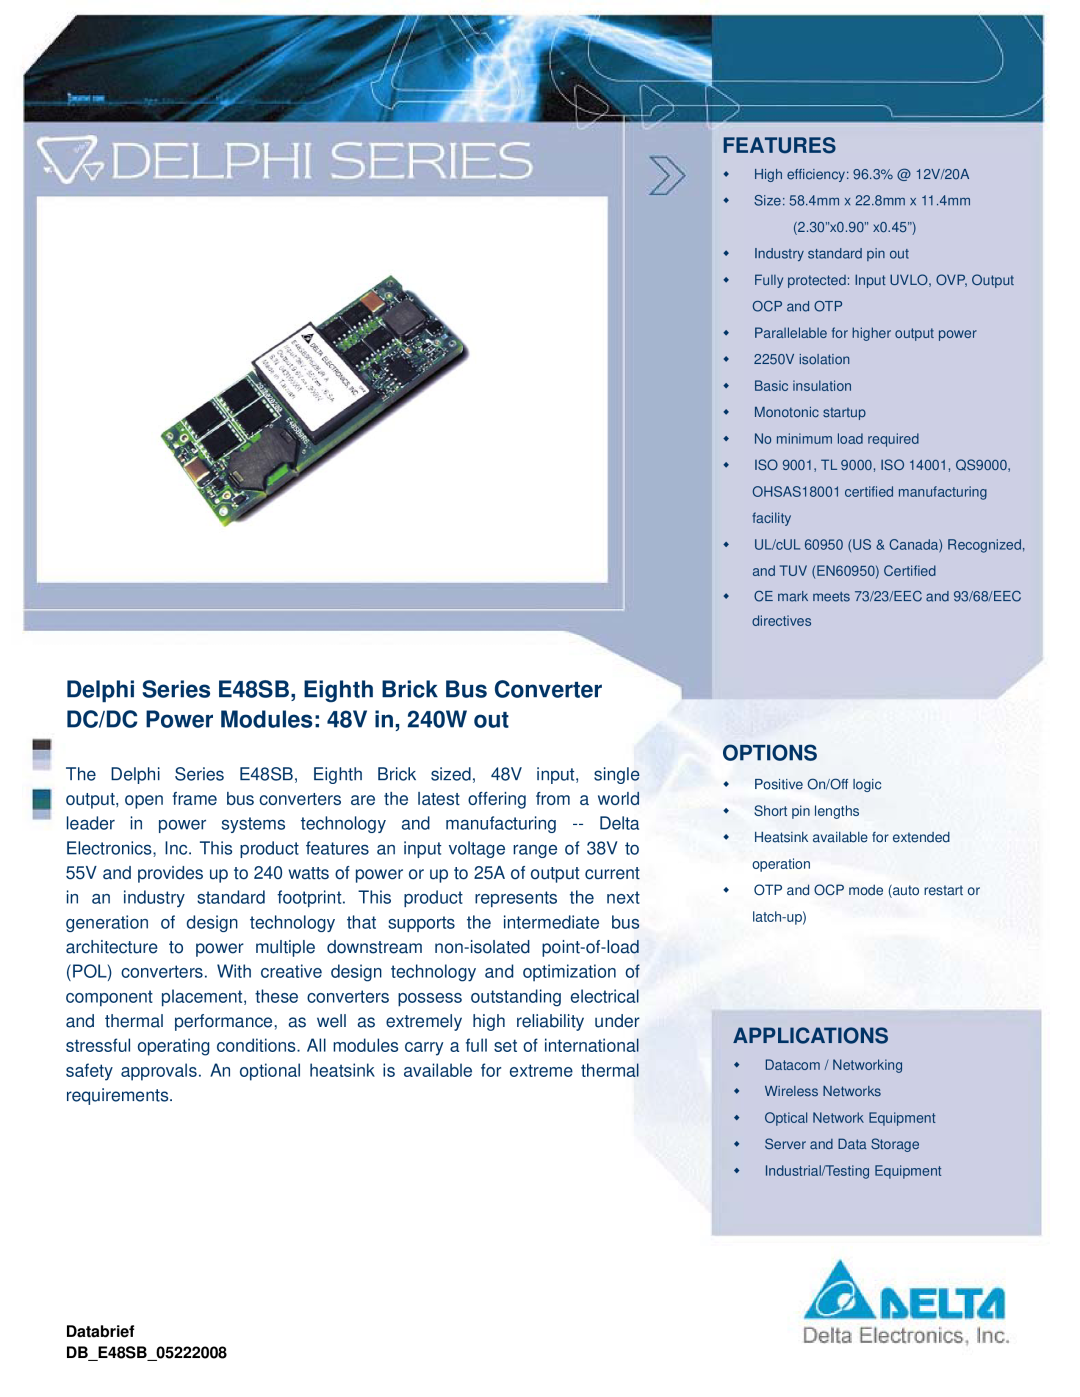 Delta Electronics Series E48SB manual Features, Options, Applications, Databrief DBE48SB05222008 